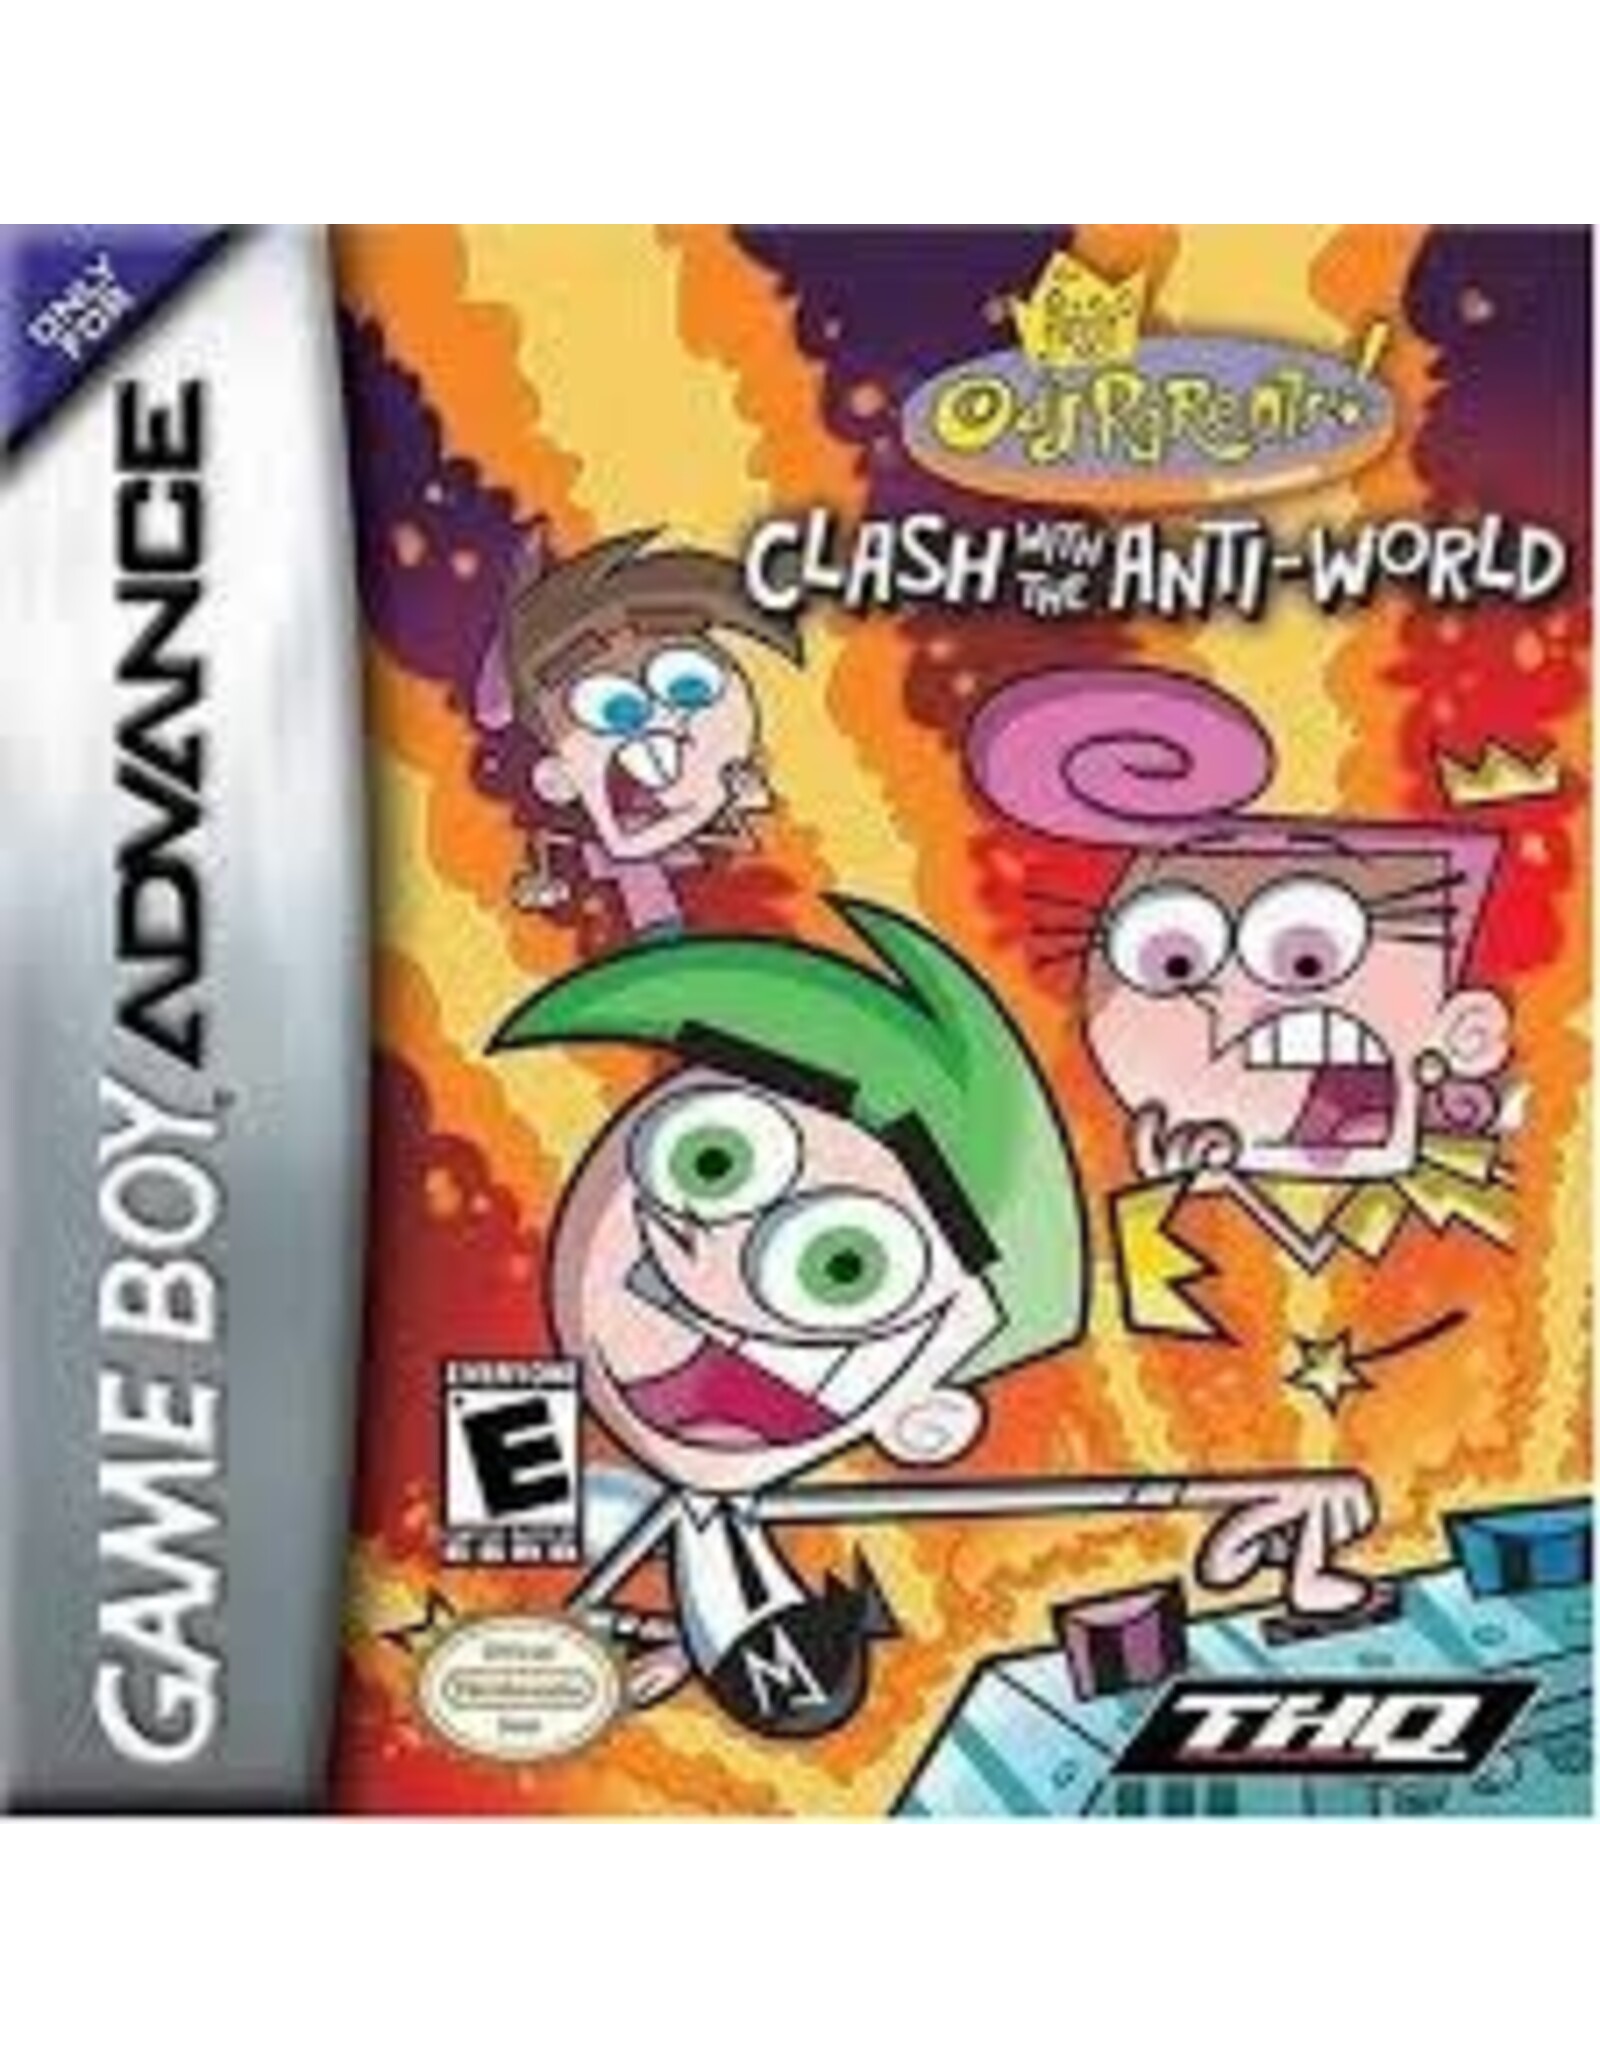 Game Boy Advance Fairly Odd Parents Clash with the Anti-World (Cart Only)